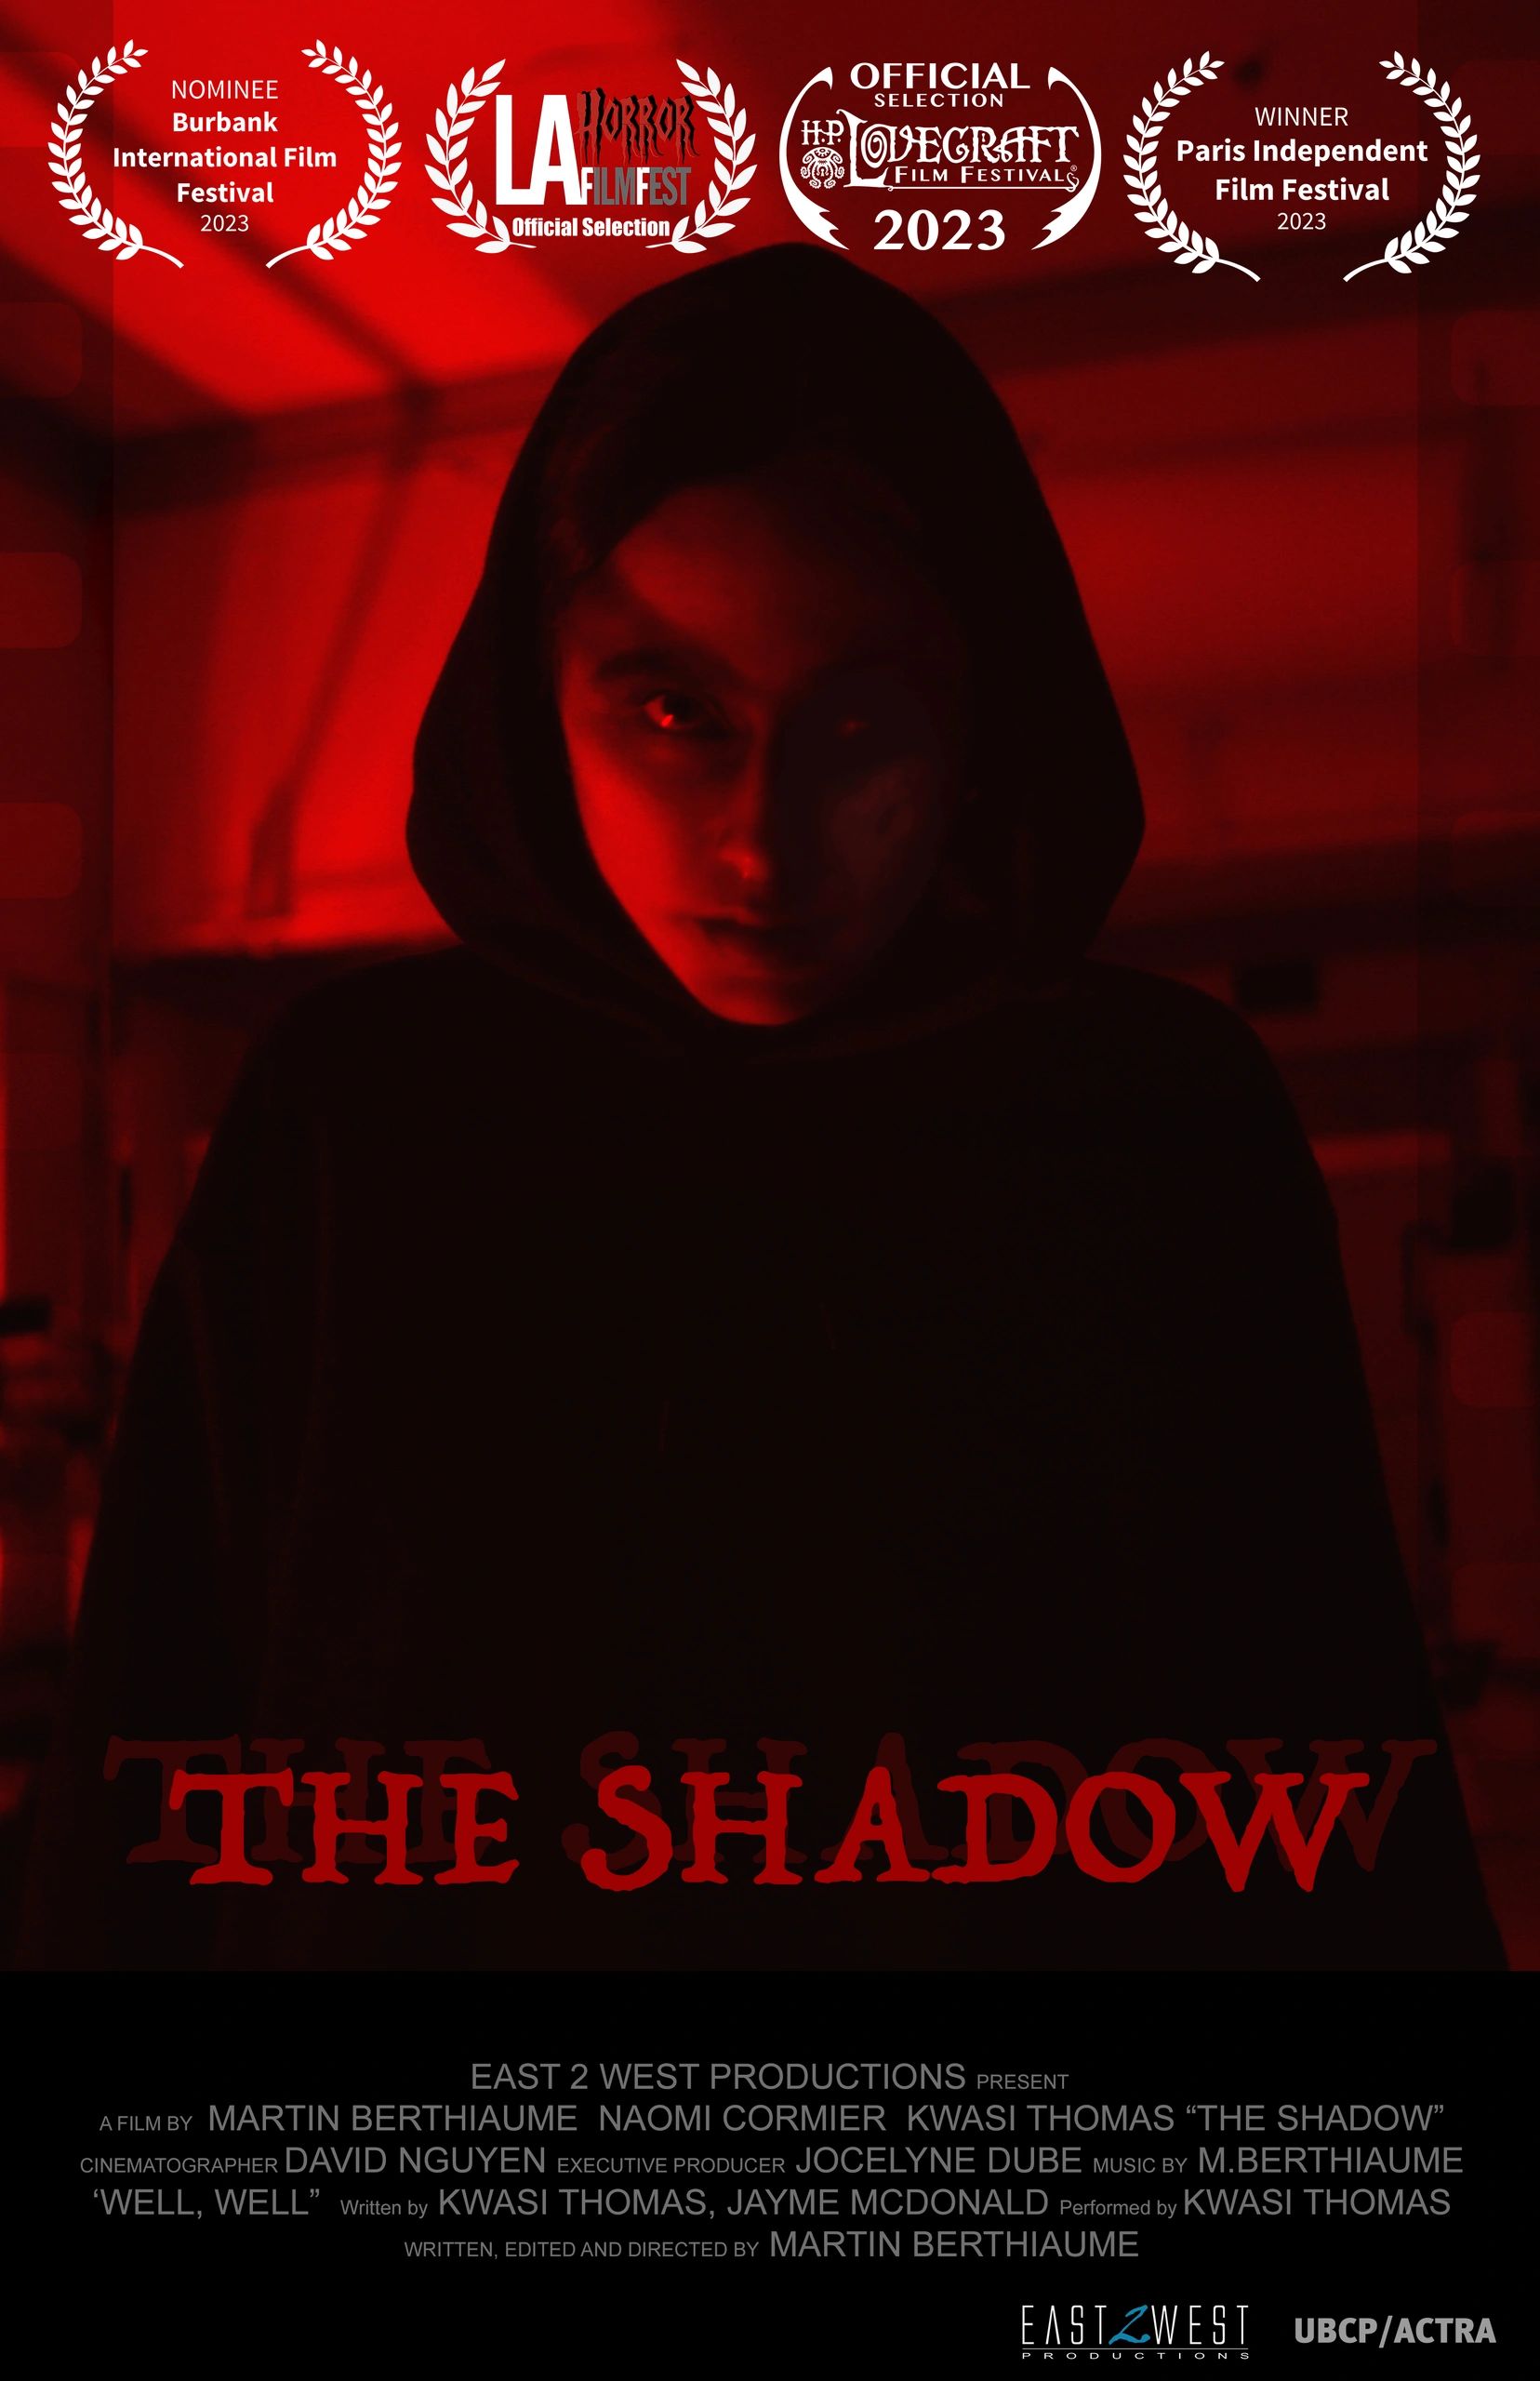 The Shadow Short Horror Film Naomi Cormier Kwasi Thomas Written and Directed by Martin Berthiaume